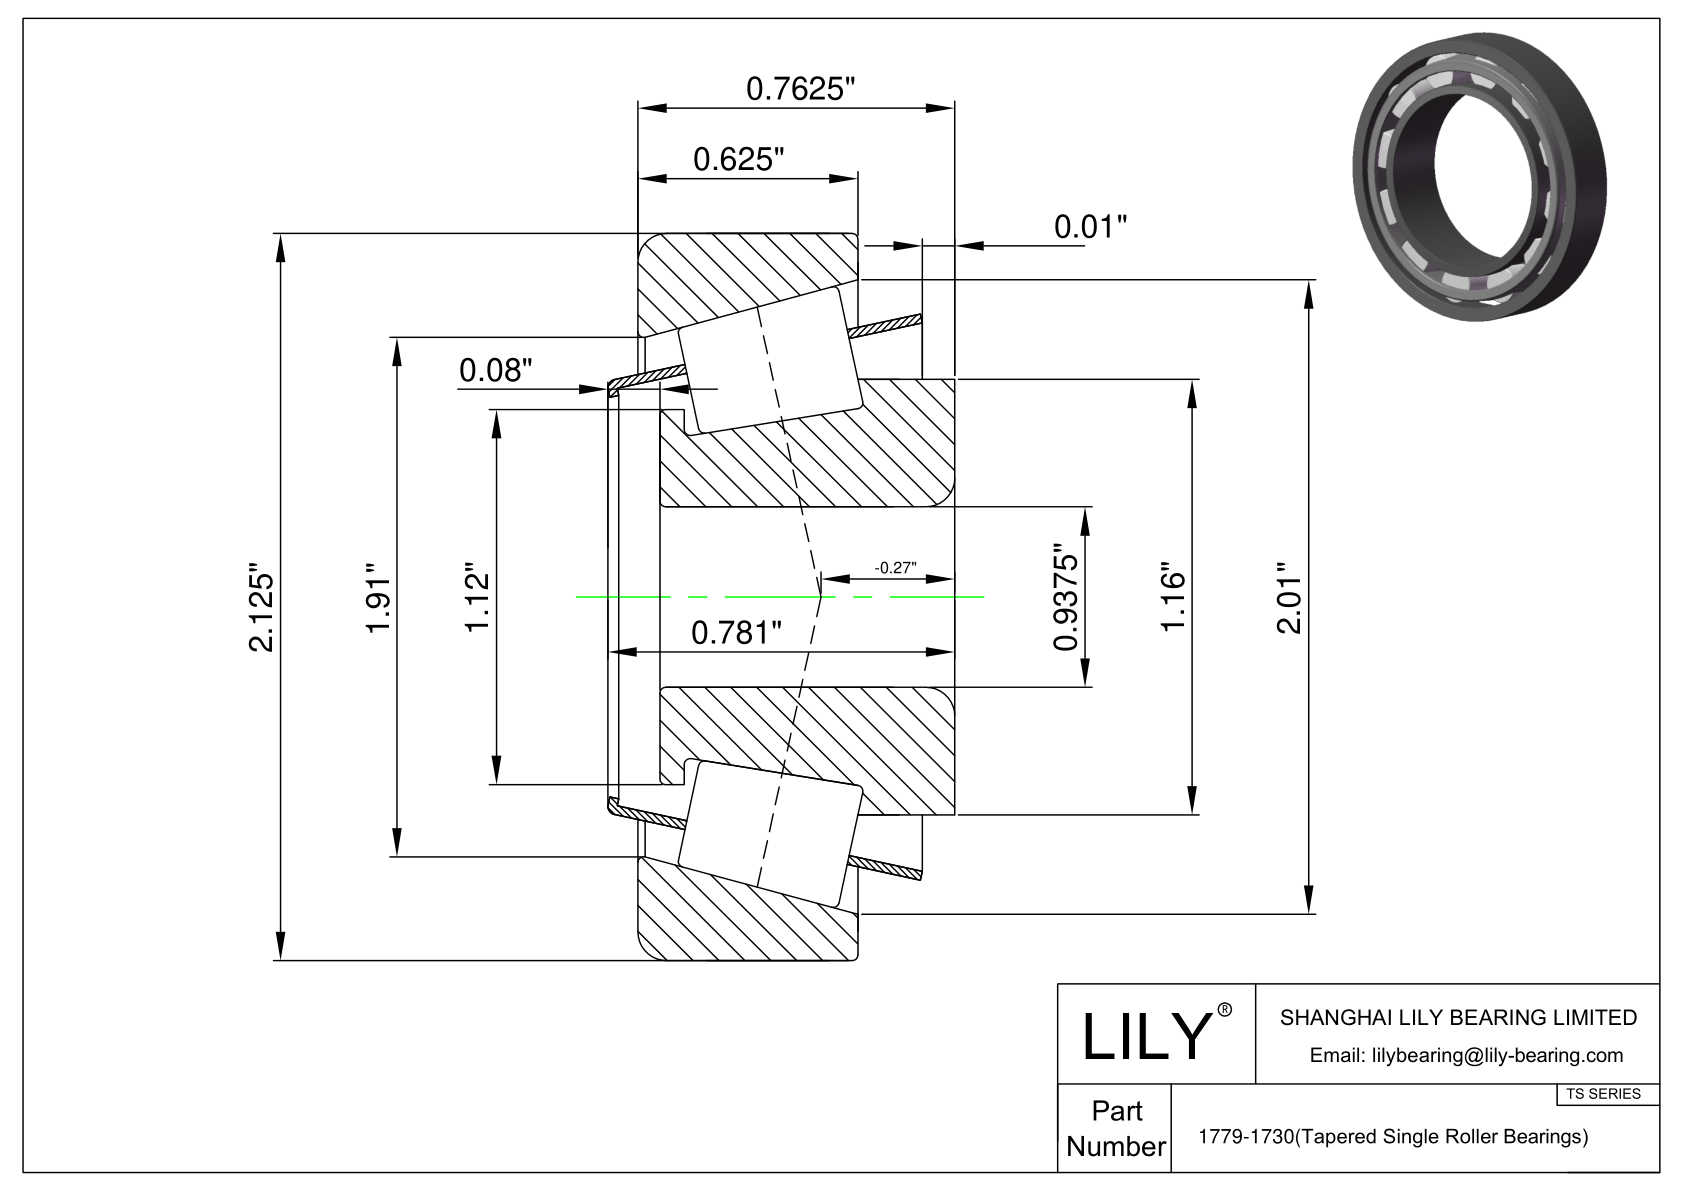 1779-1730 TS (Tapered Single Roller Bearings) (Imperial) cad drawing